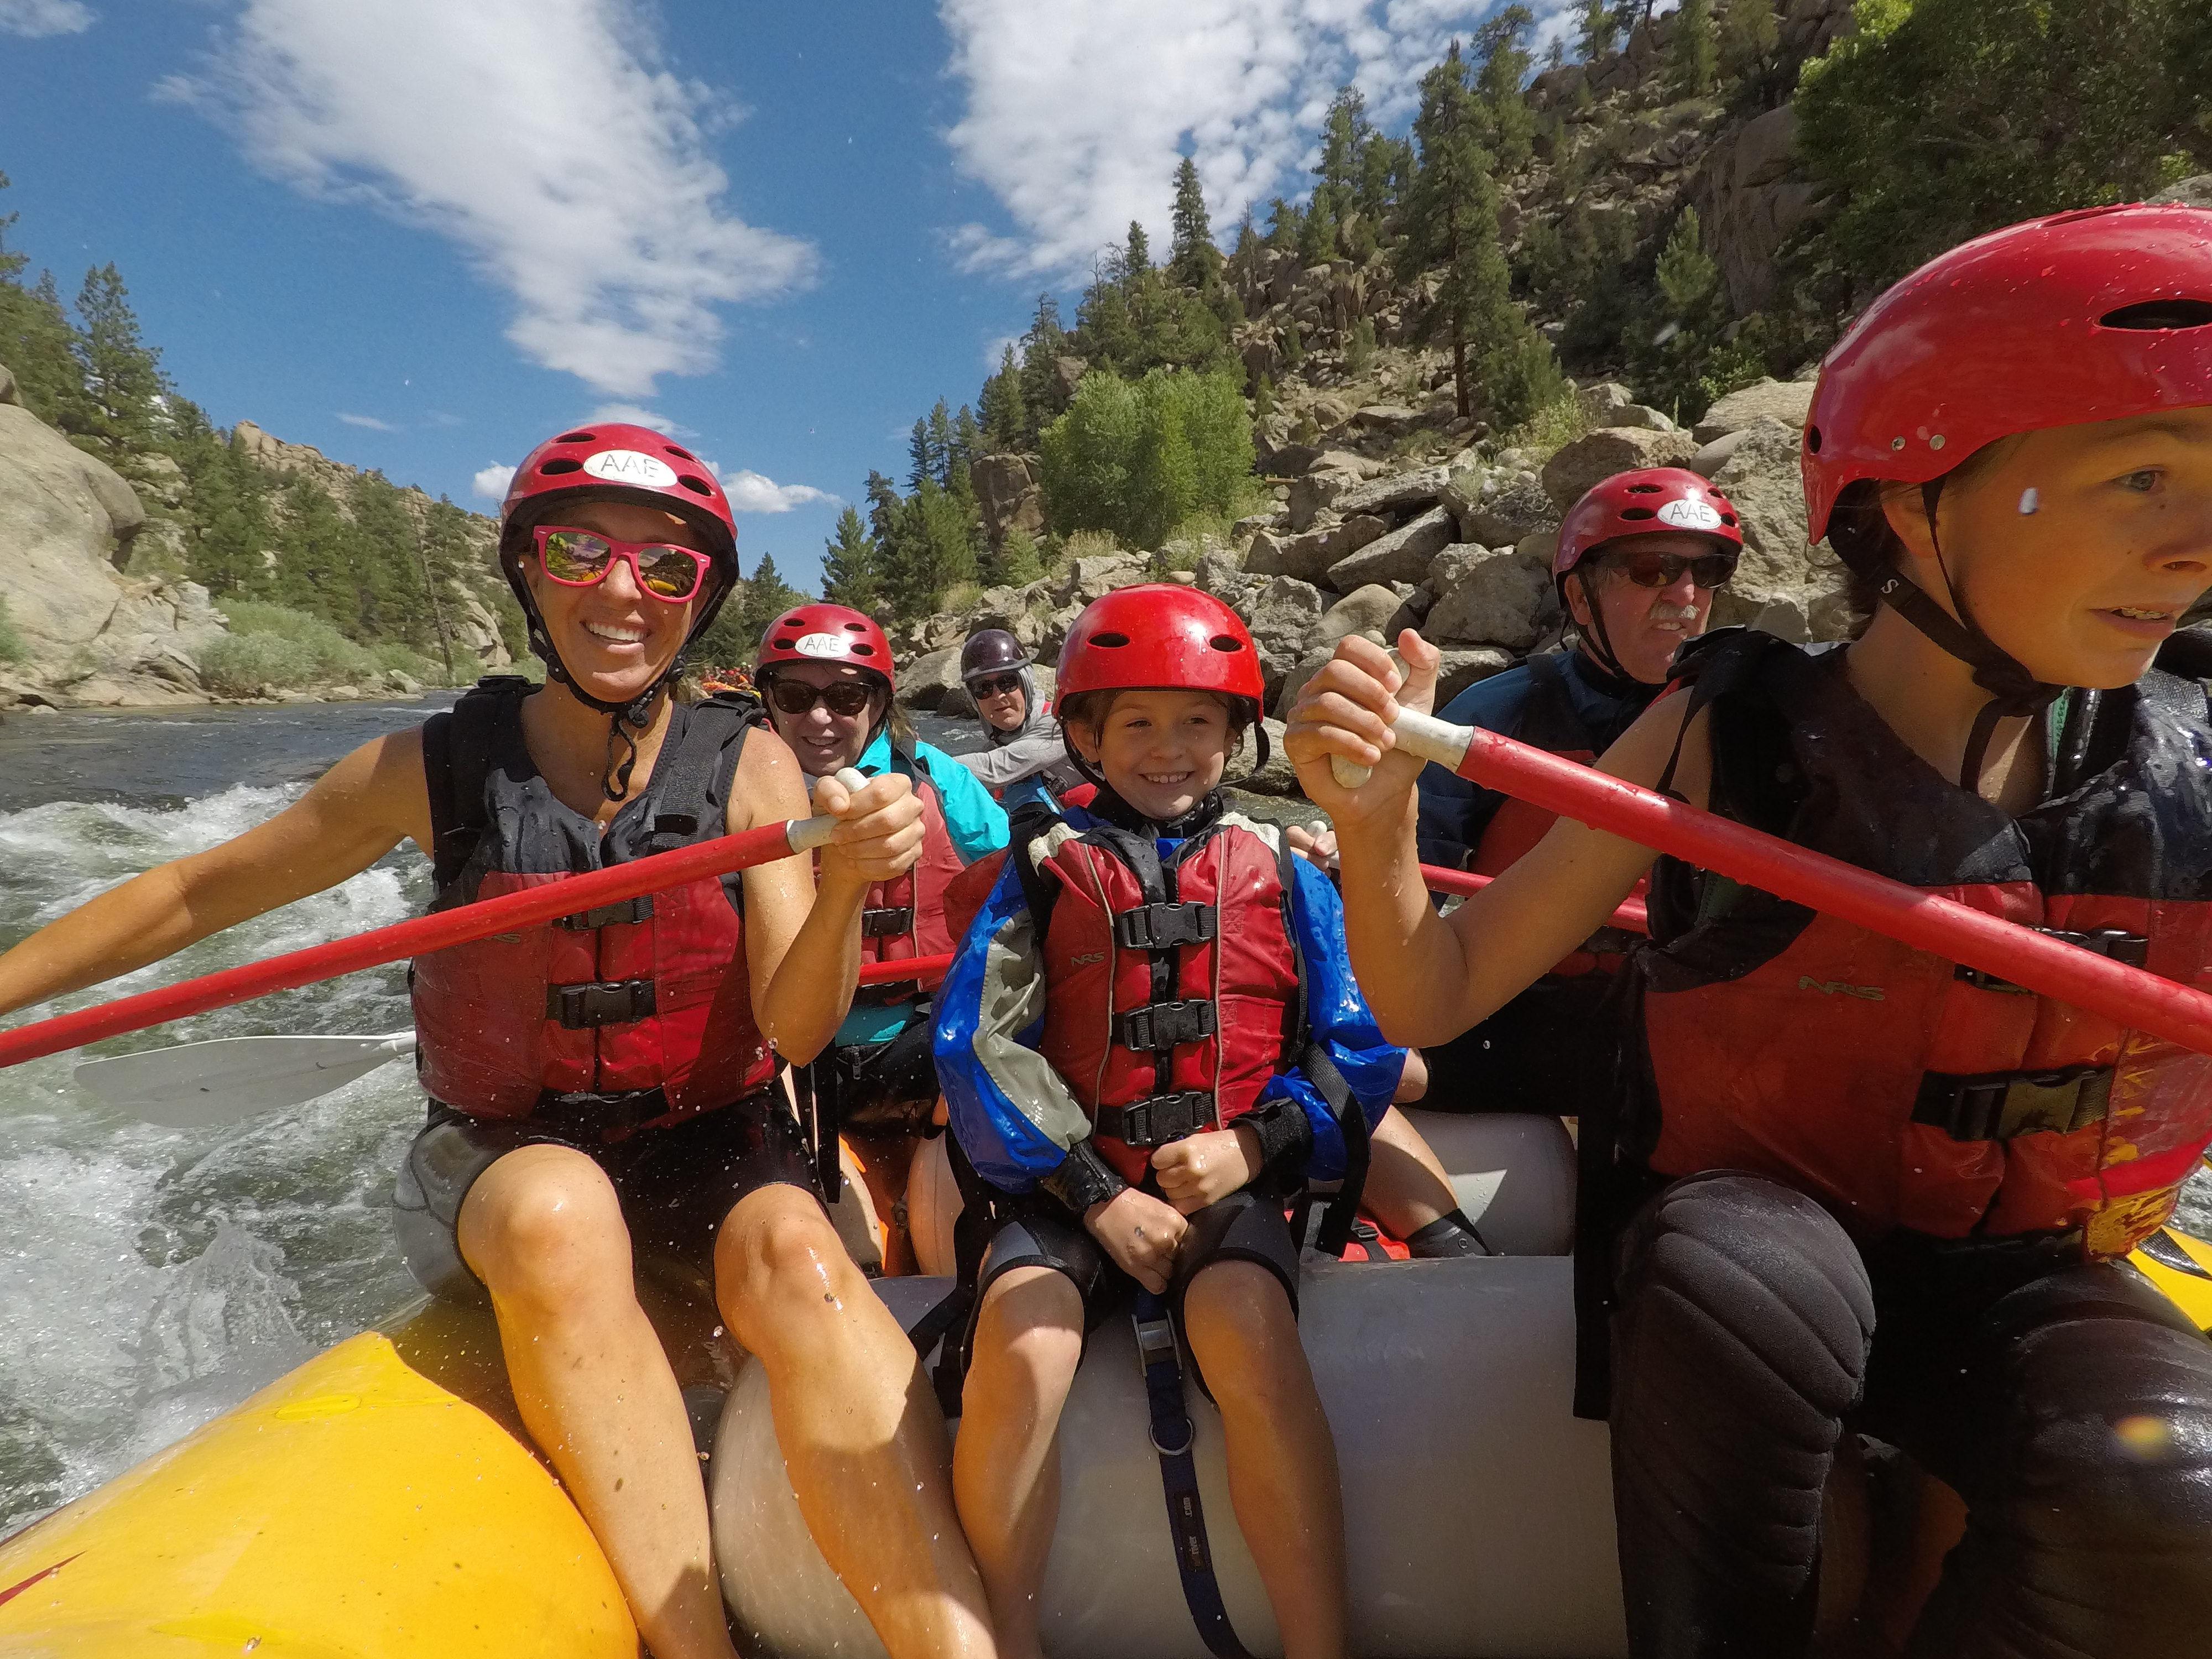 Rafters taking a family float trip down the Arkansas River